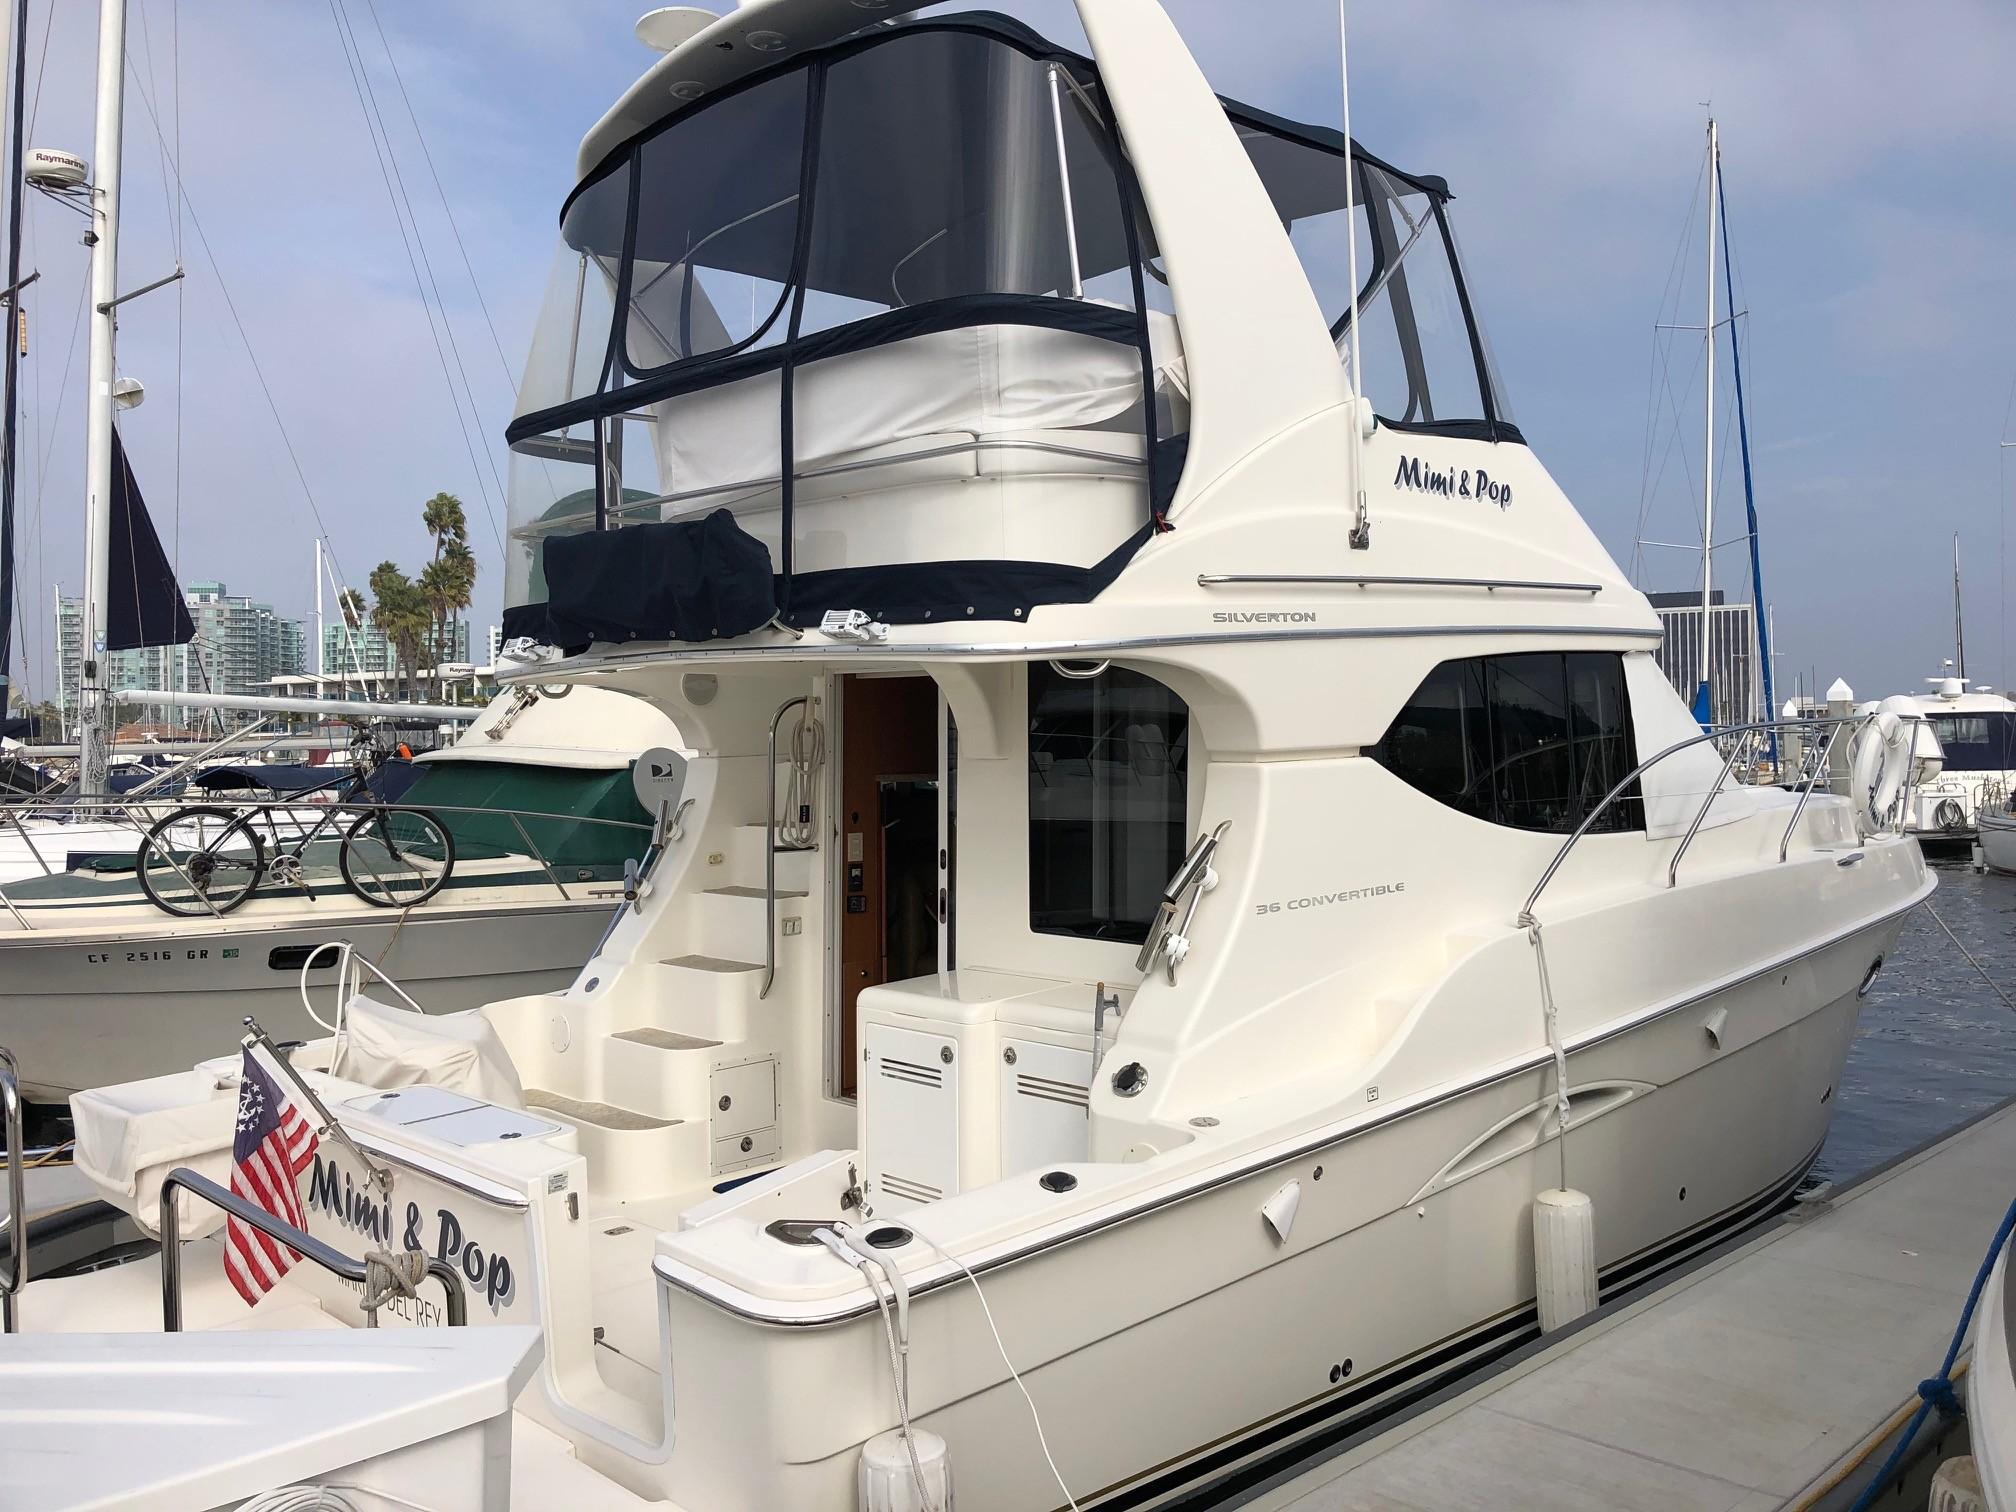 reviews on pop yachts